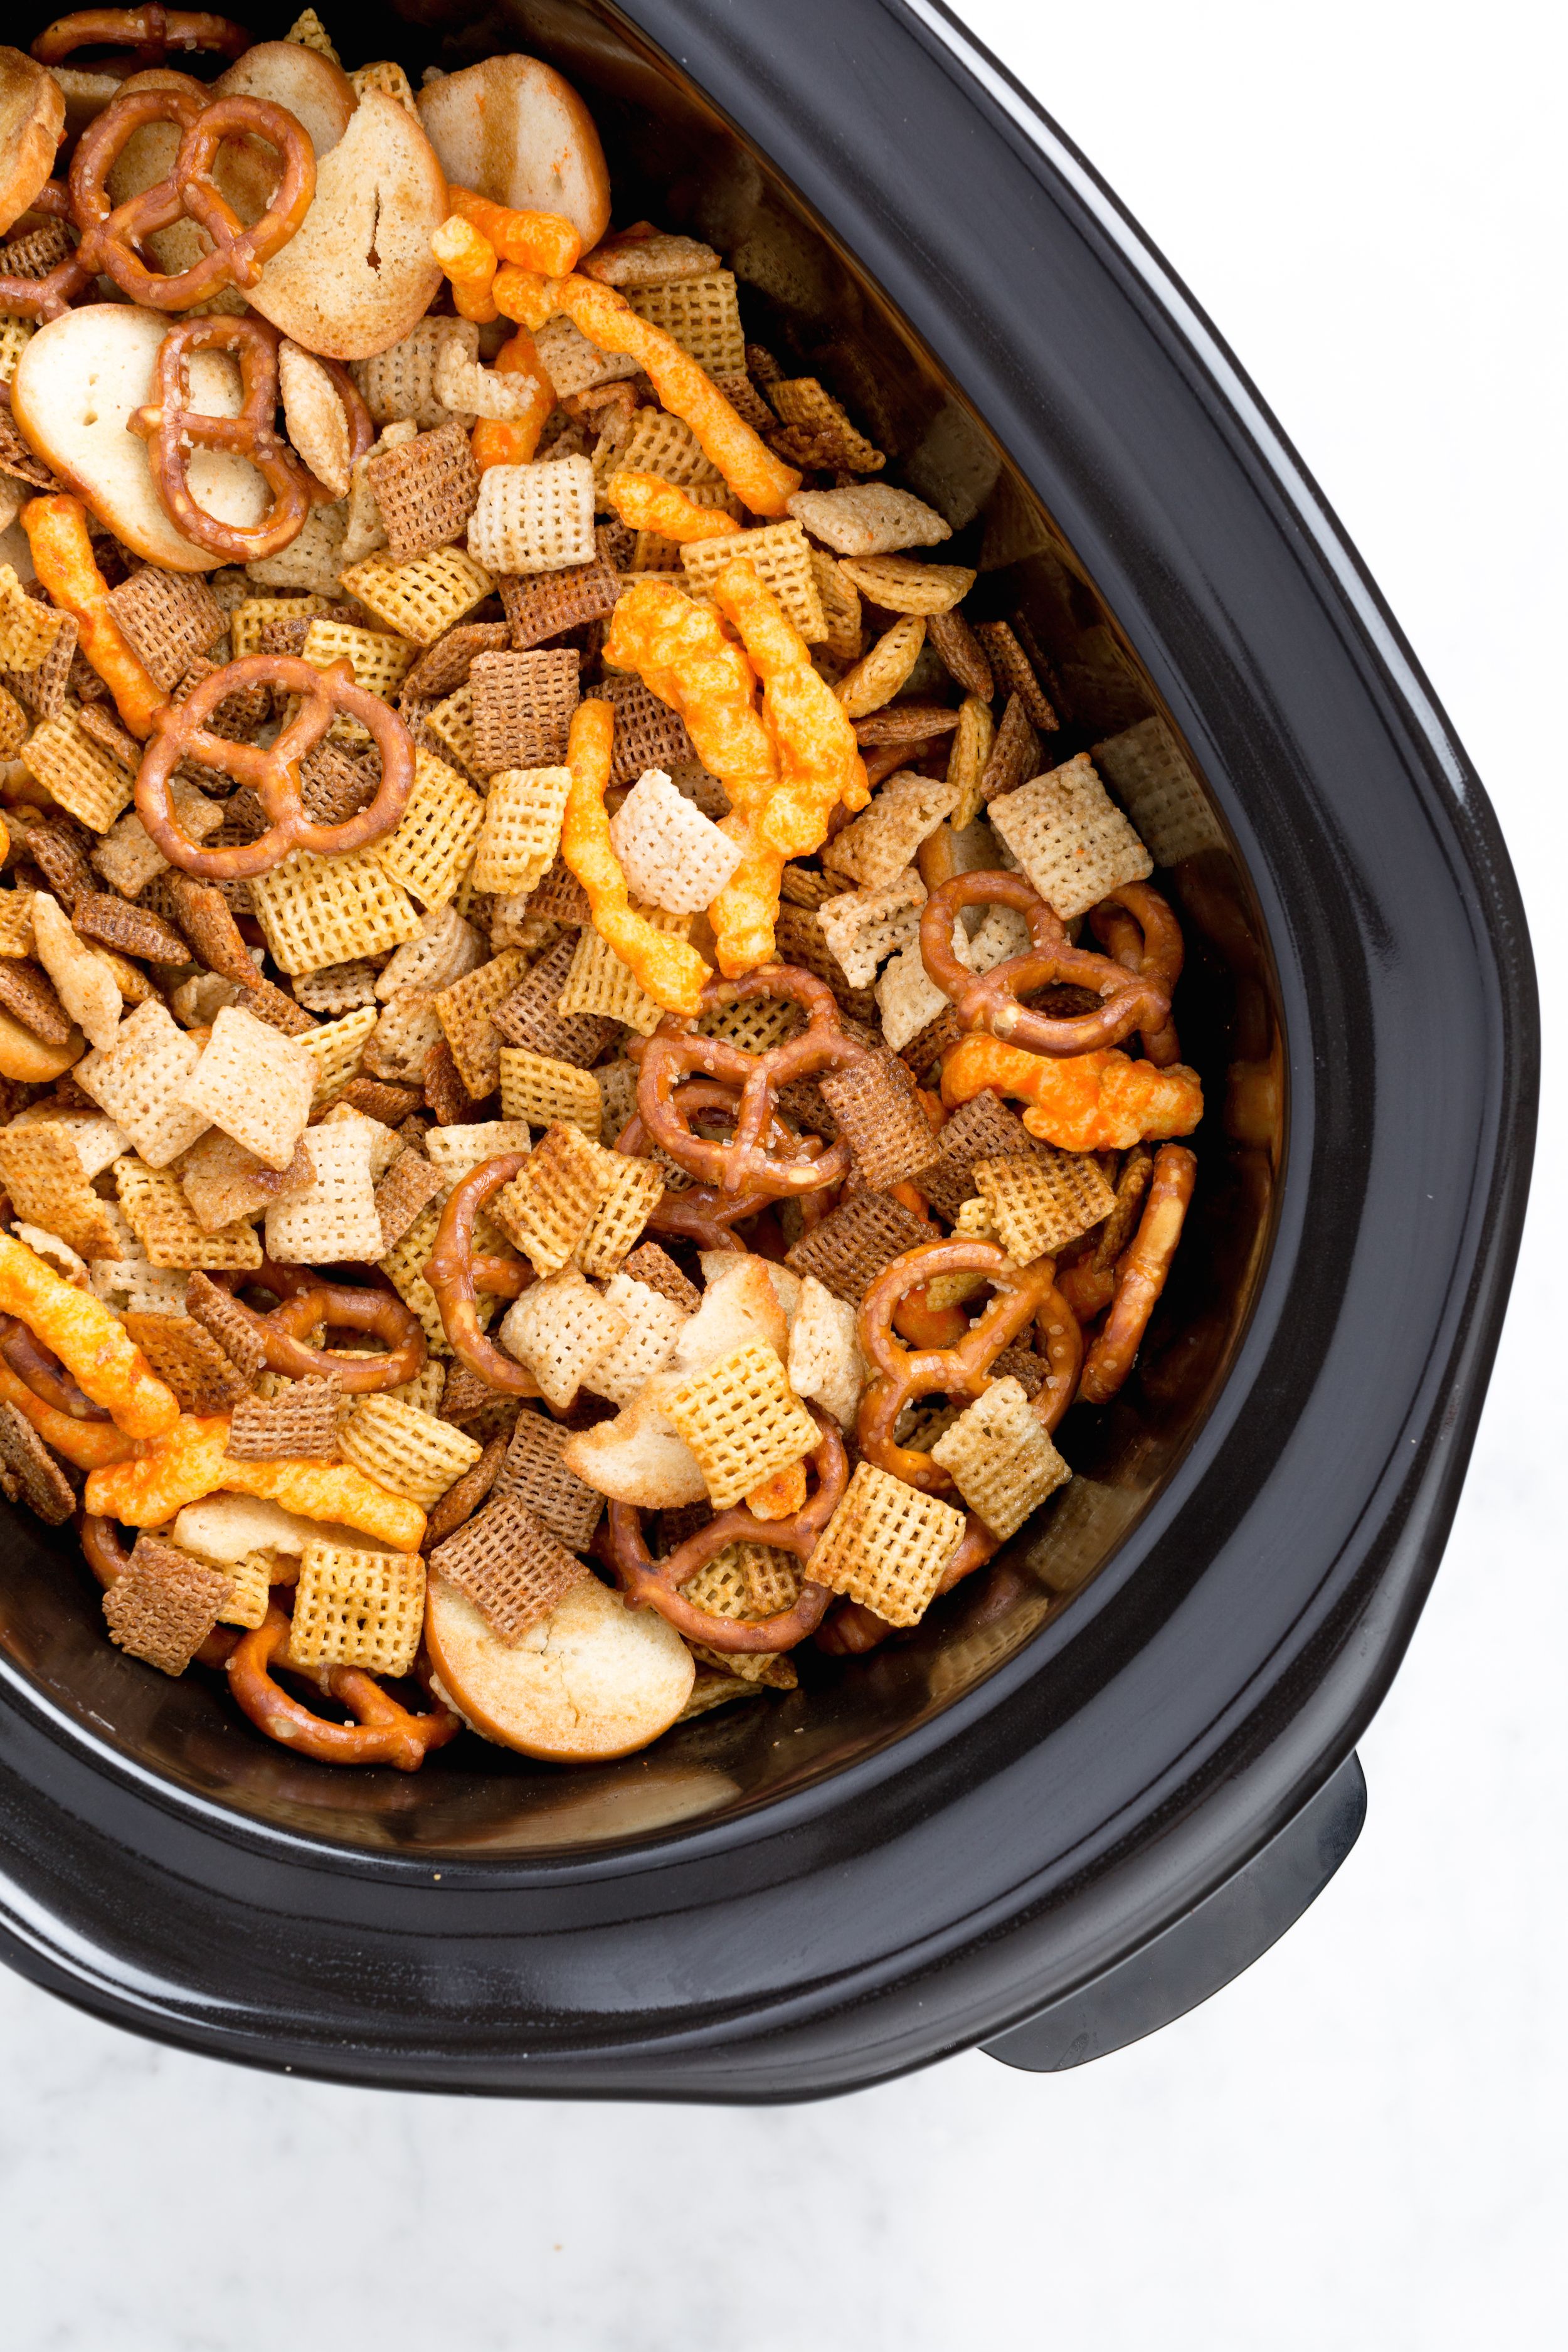 https://hips.hearstapps.com/delish/assets/15/42/1445021970-delish-slow-cooker-chex-mix-3.jpg